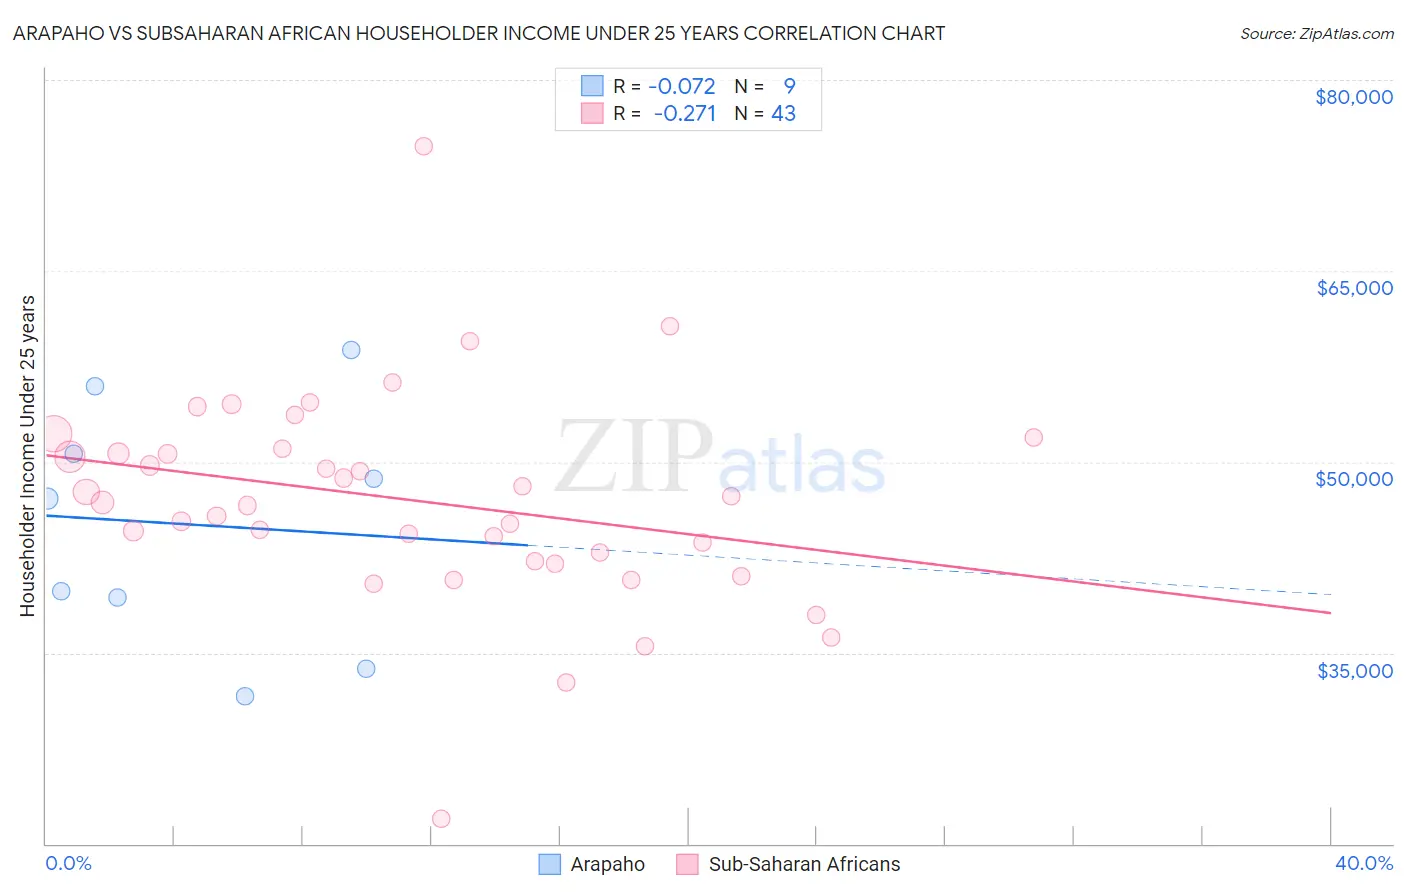 Arapaho vs Subsaharan African Householder Income Under 25 years